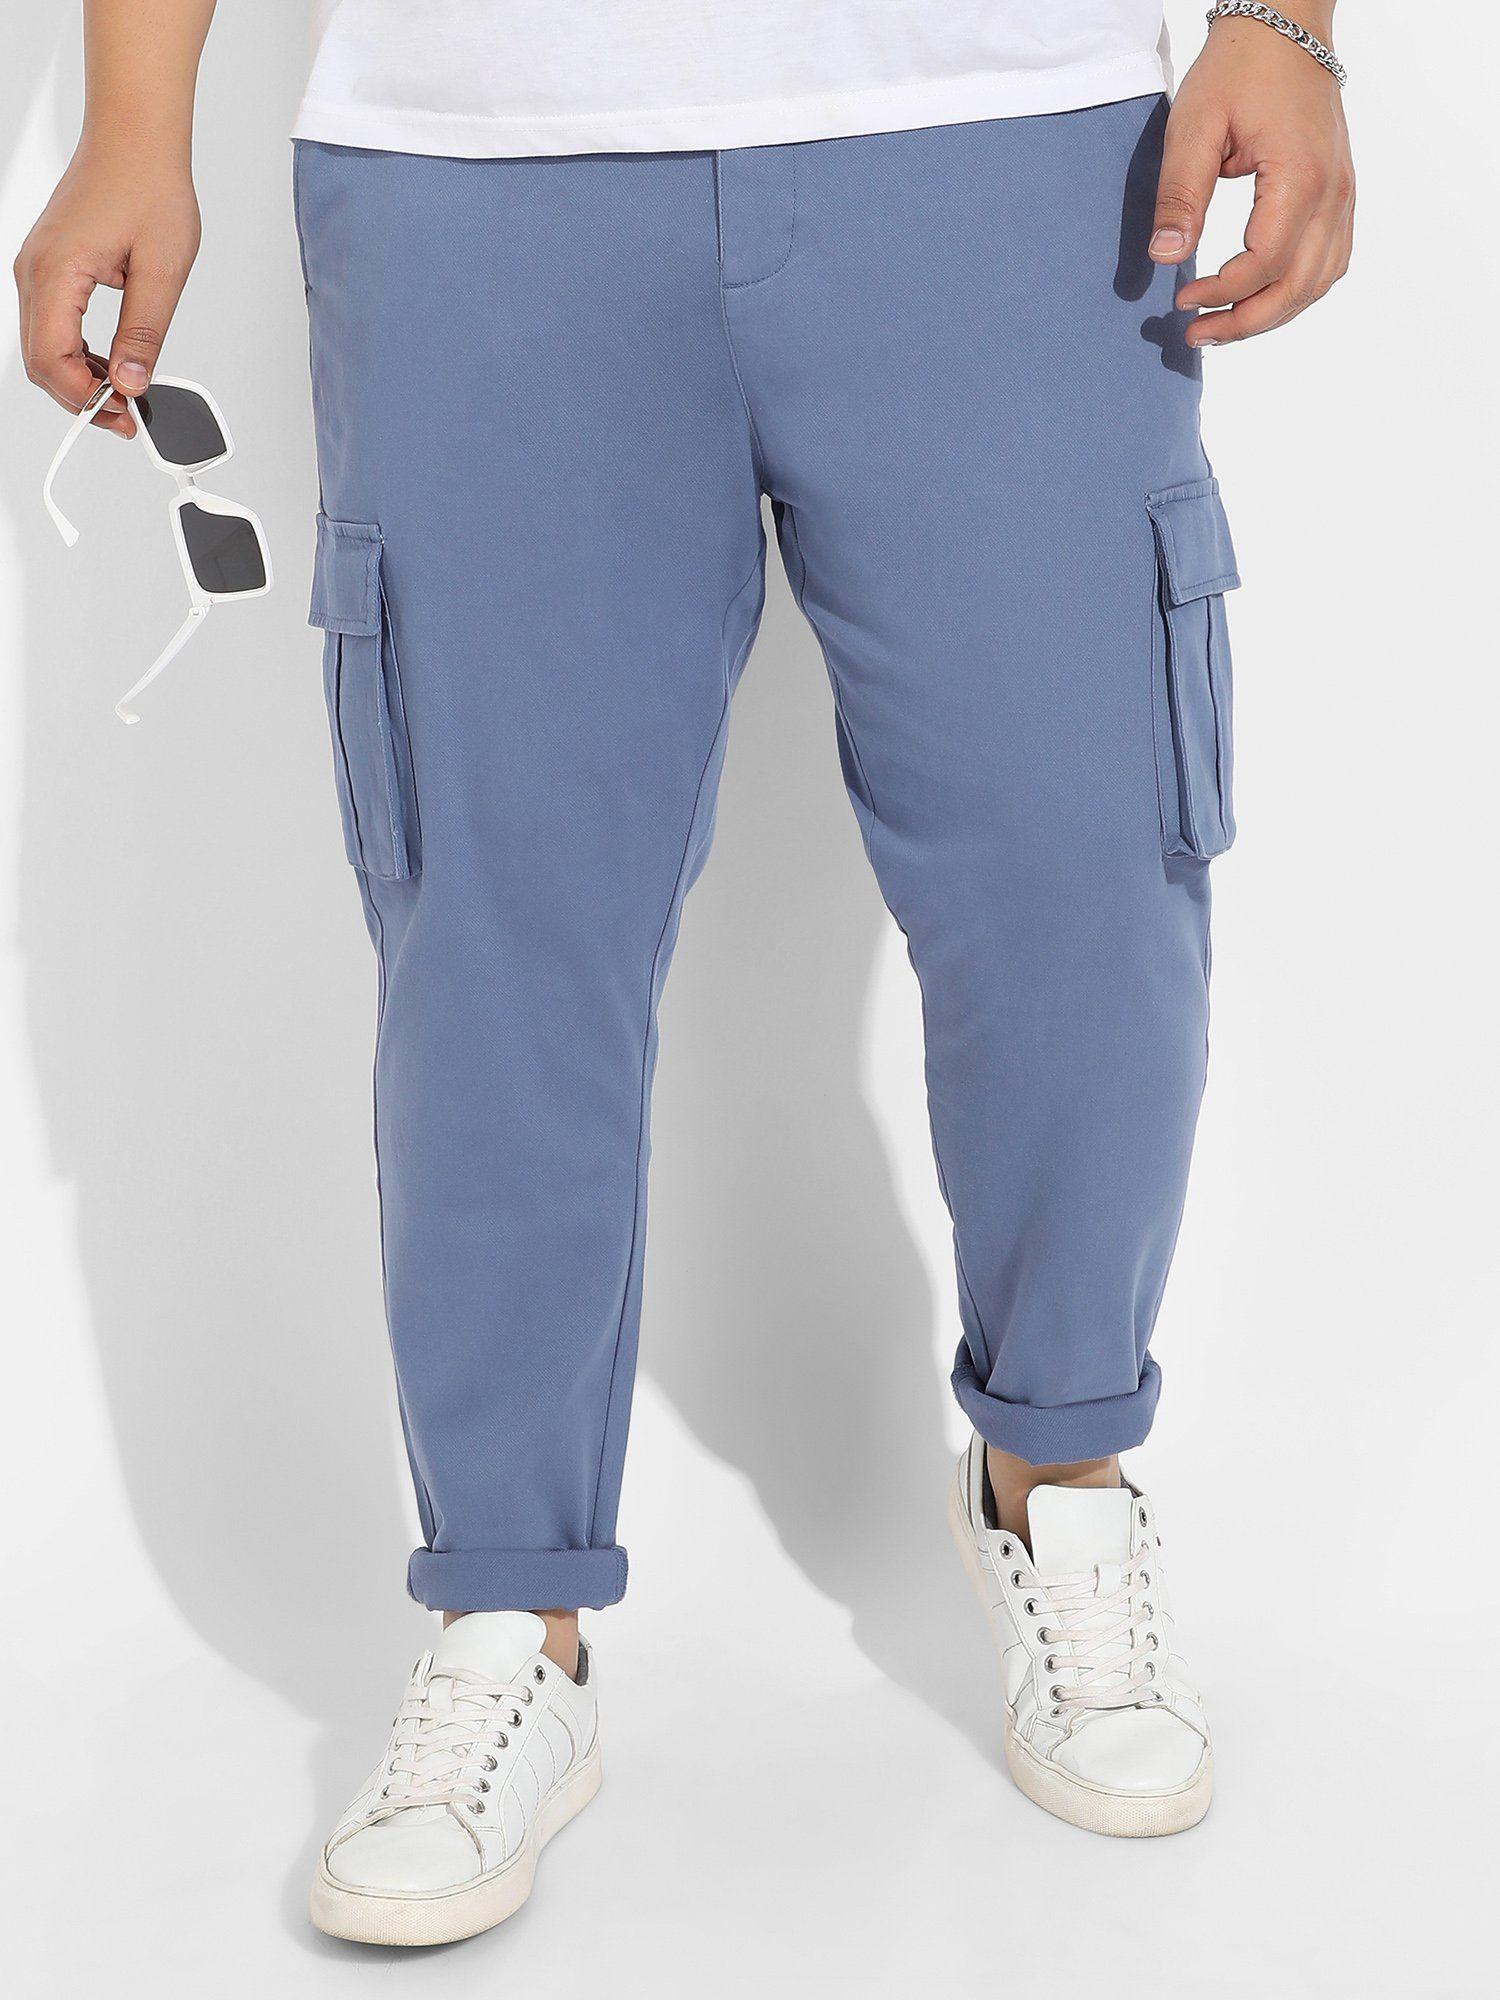 mens blue cargo trousers